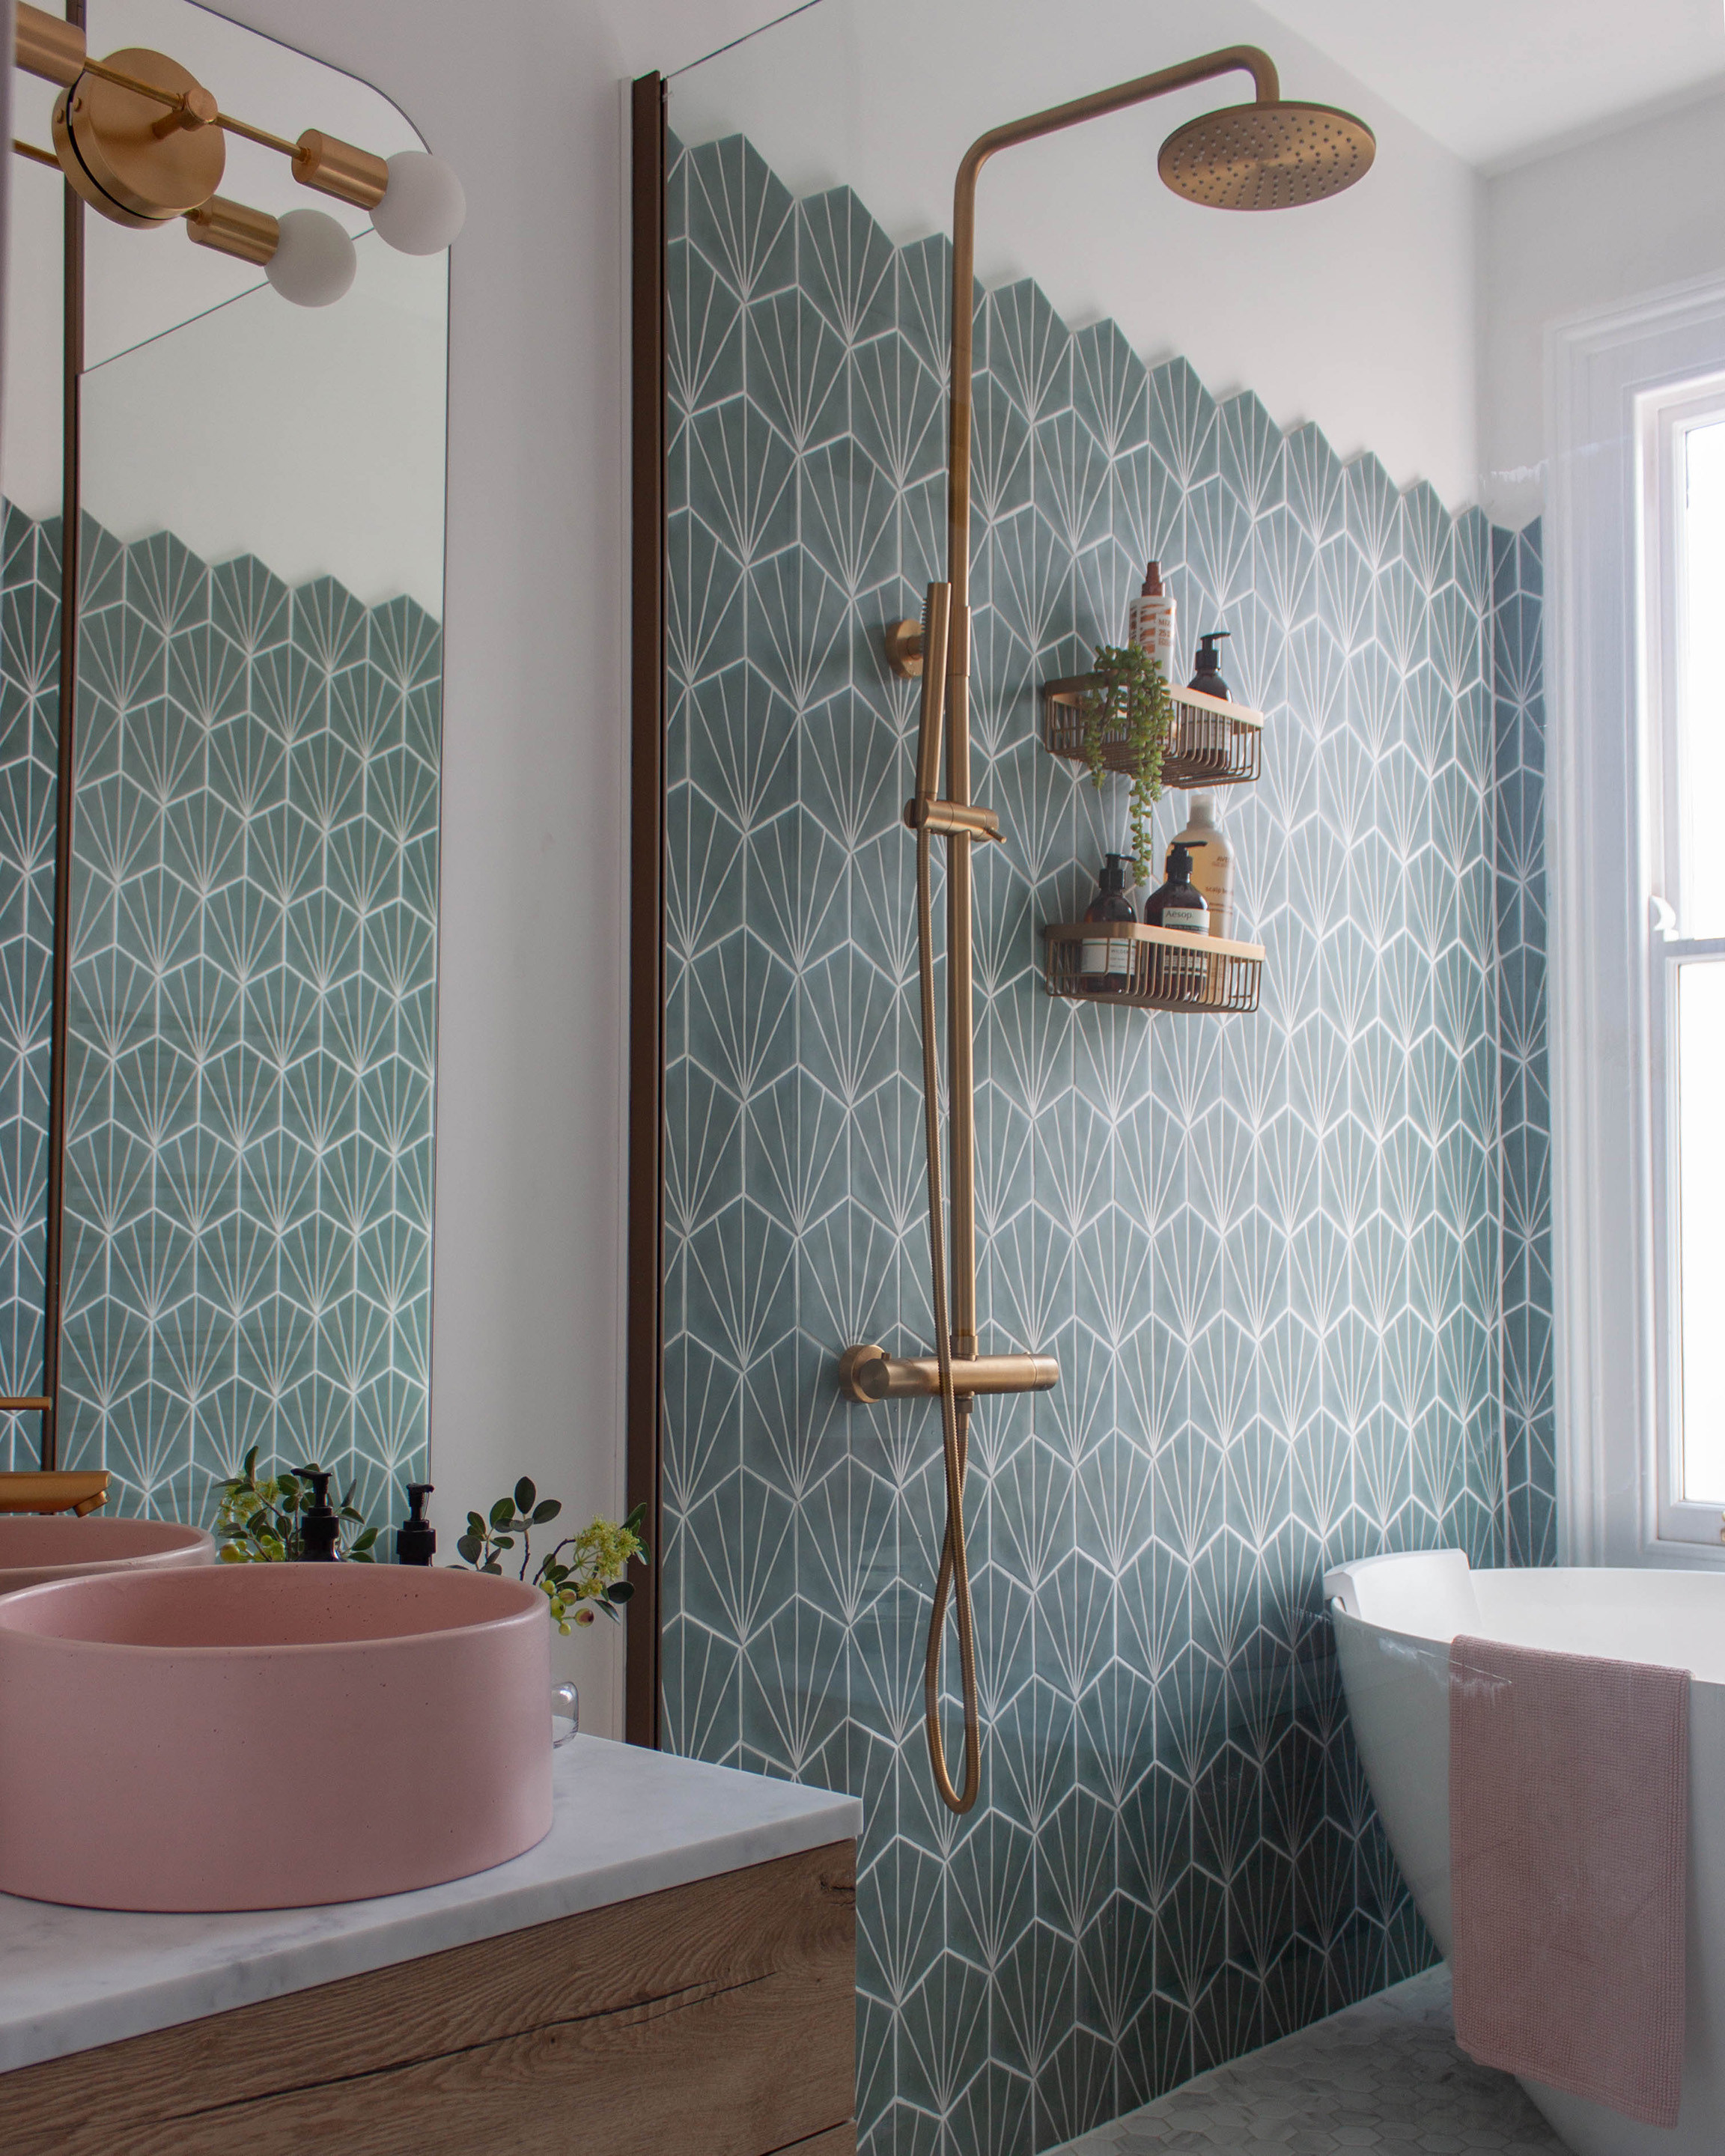 A snapshot of a wetroom area in a small victorian bathroom in Leamington Spa. Showing Hexagonal teal wall tiles, marble mosaic floor tiles, a brushed gold shower with rainfall head and a pink concrete basin.